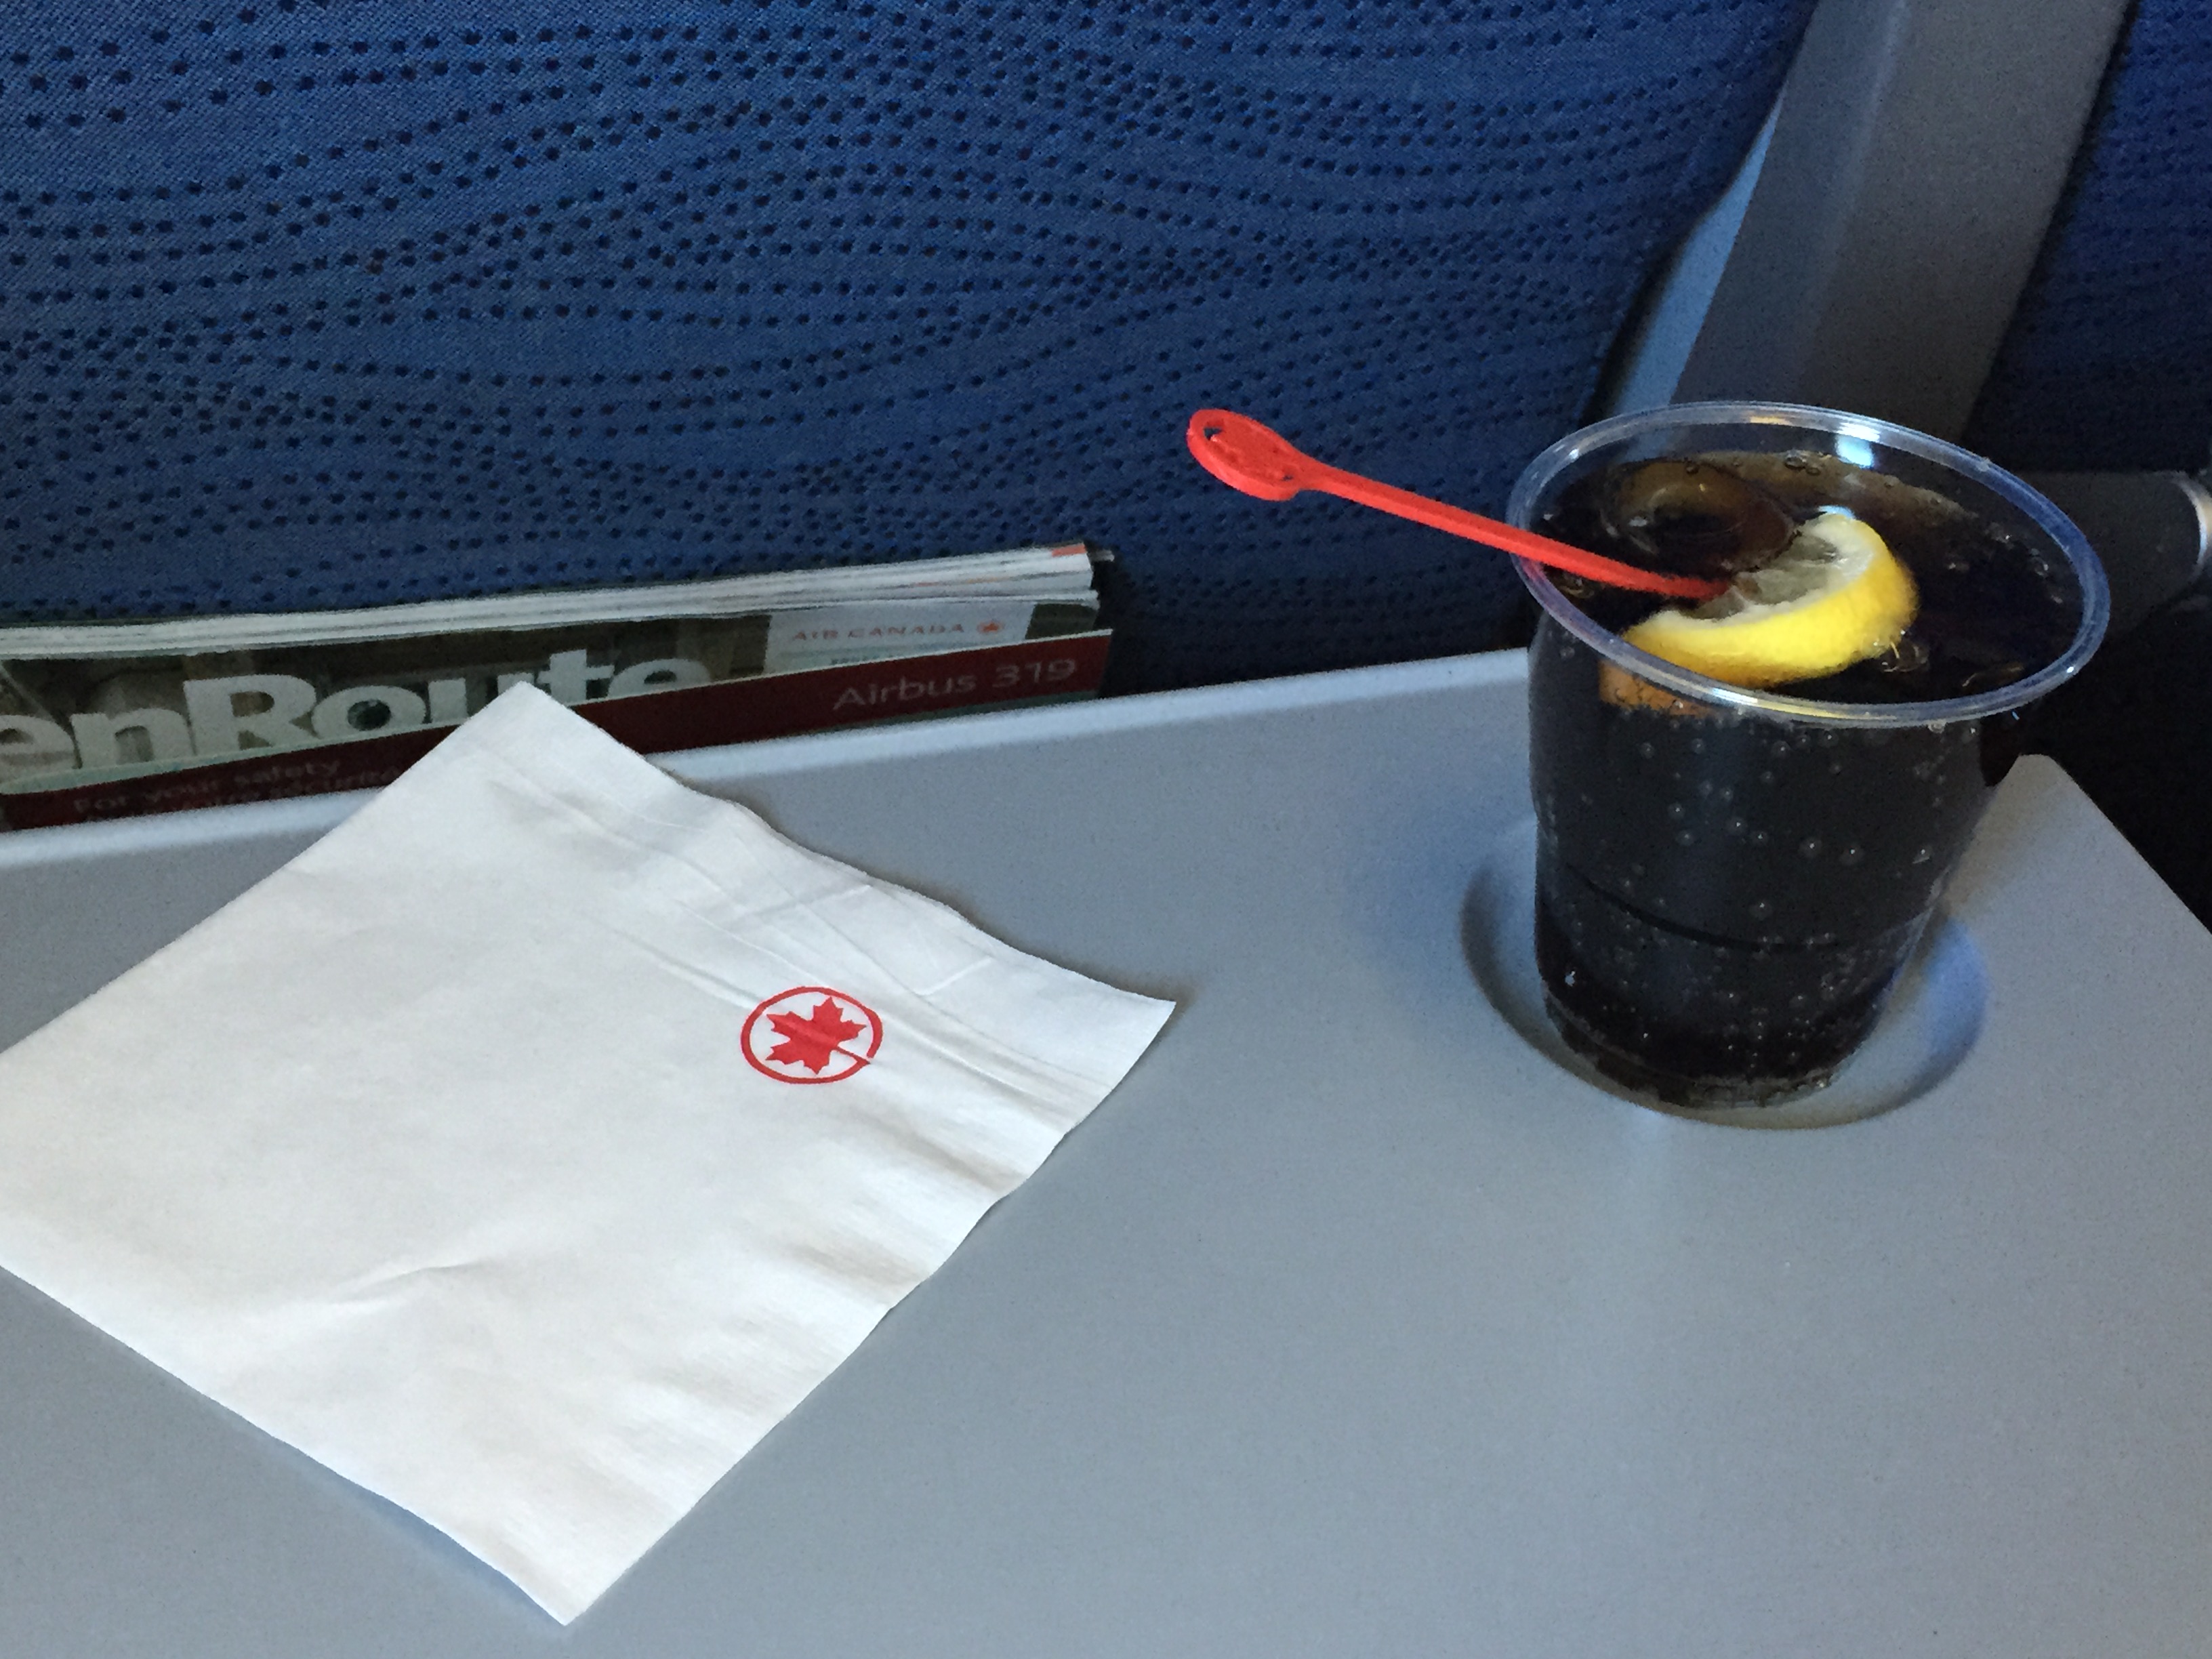 Air Canada Airbus A319 100 Economy Class Inflight Amenities Beverages Services Photos